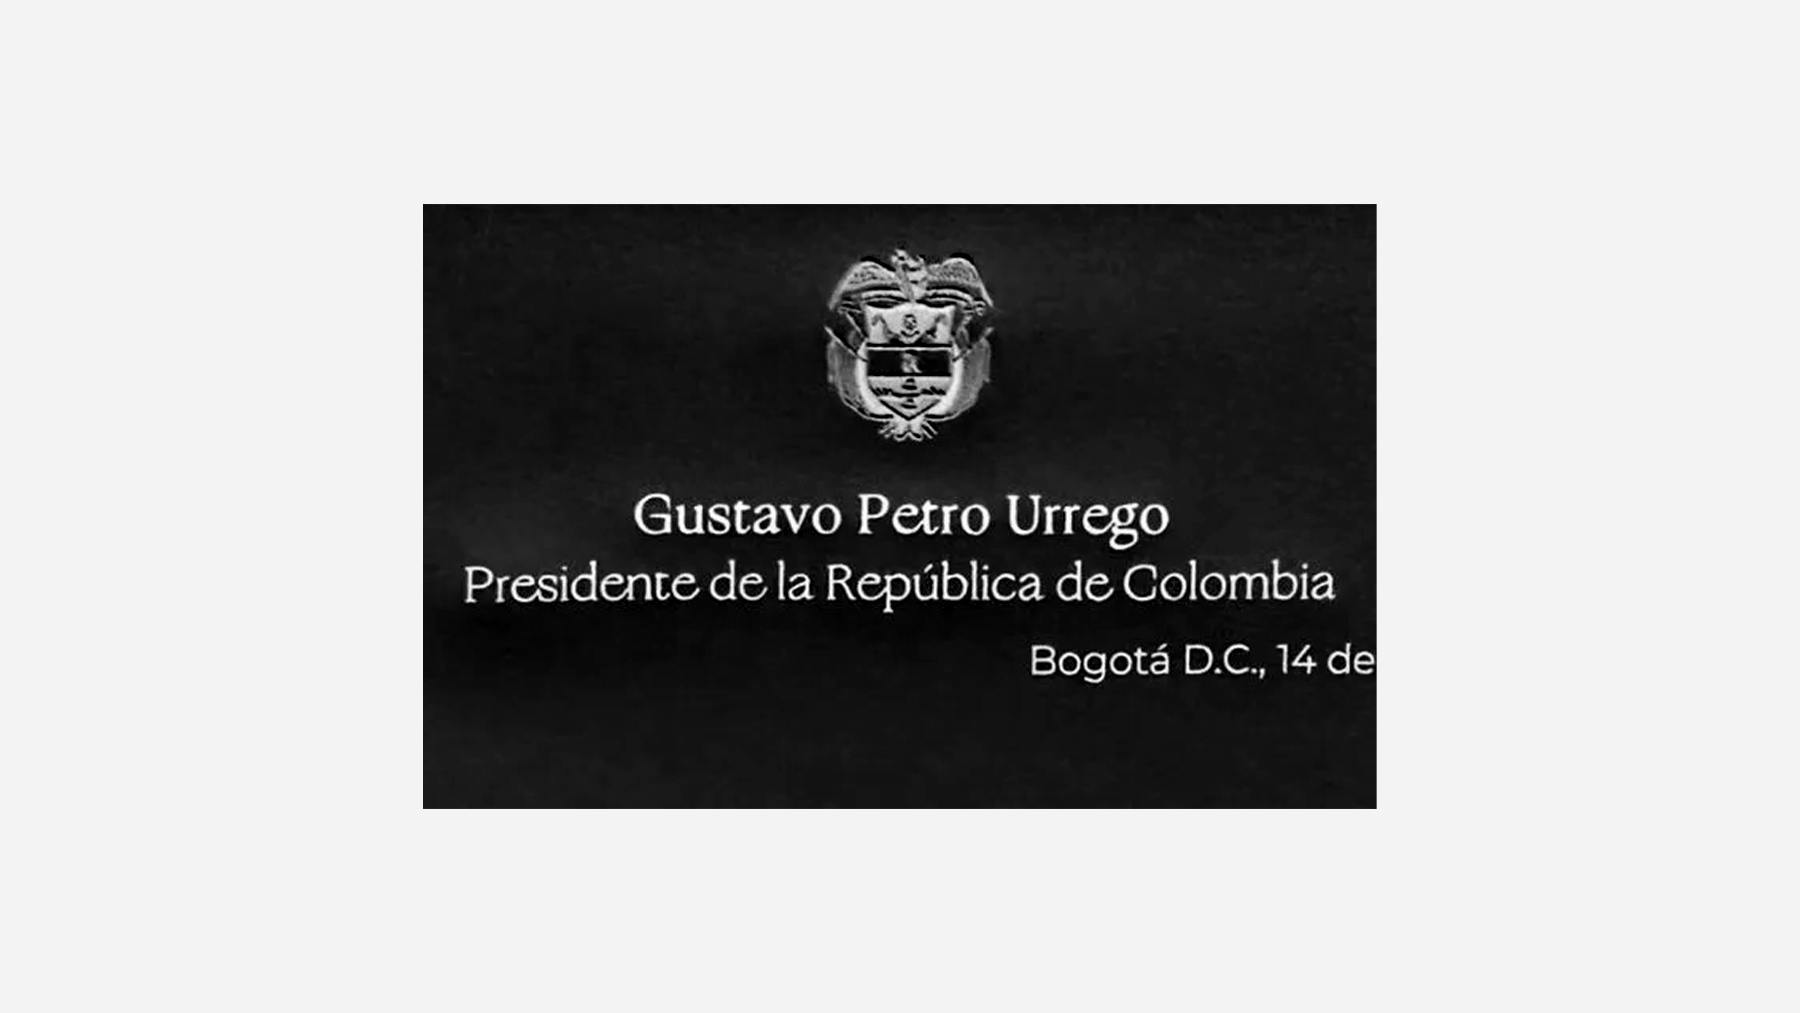 Ogg for the Letterhead of the President of Colombia